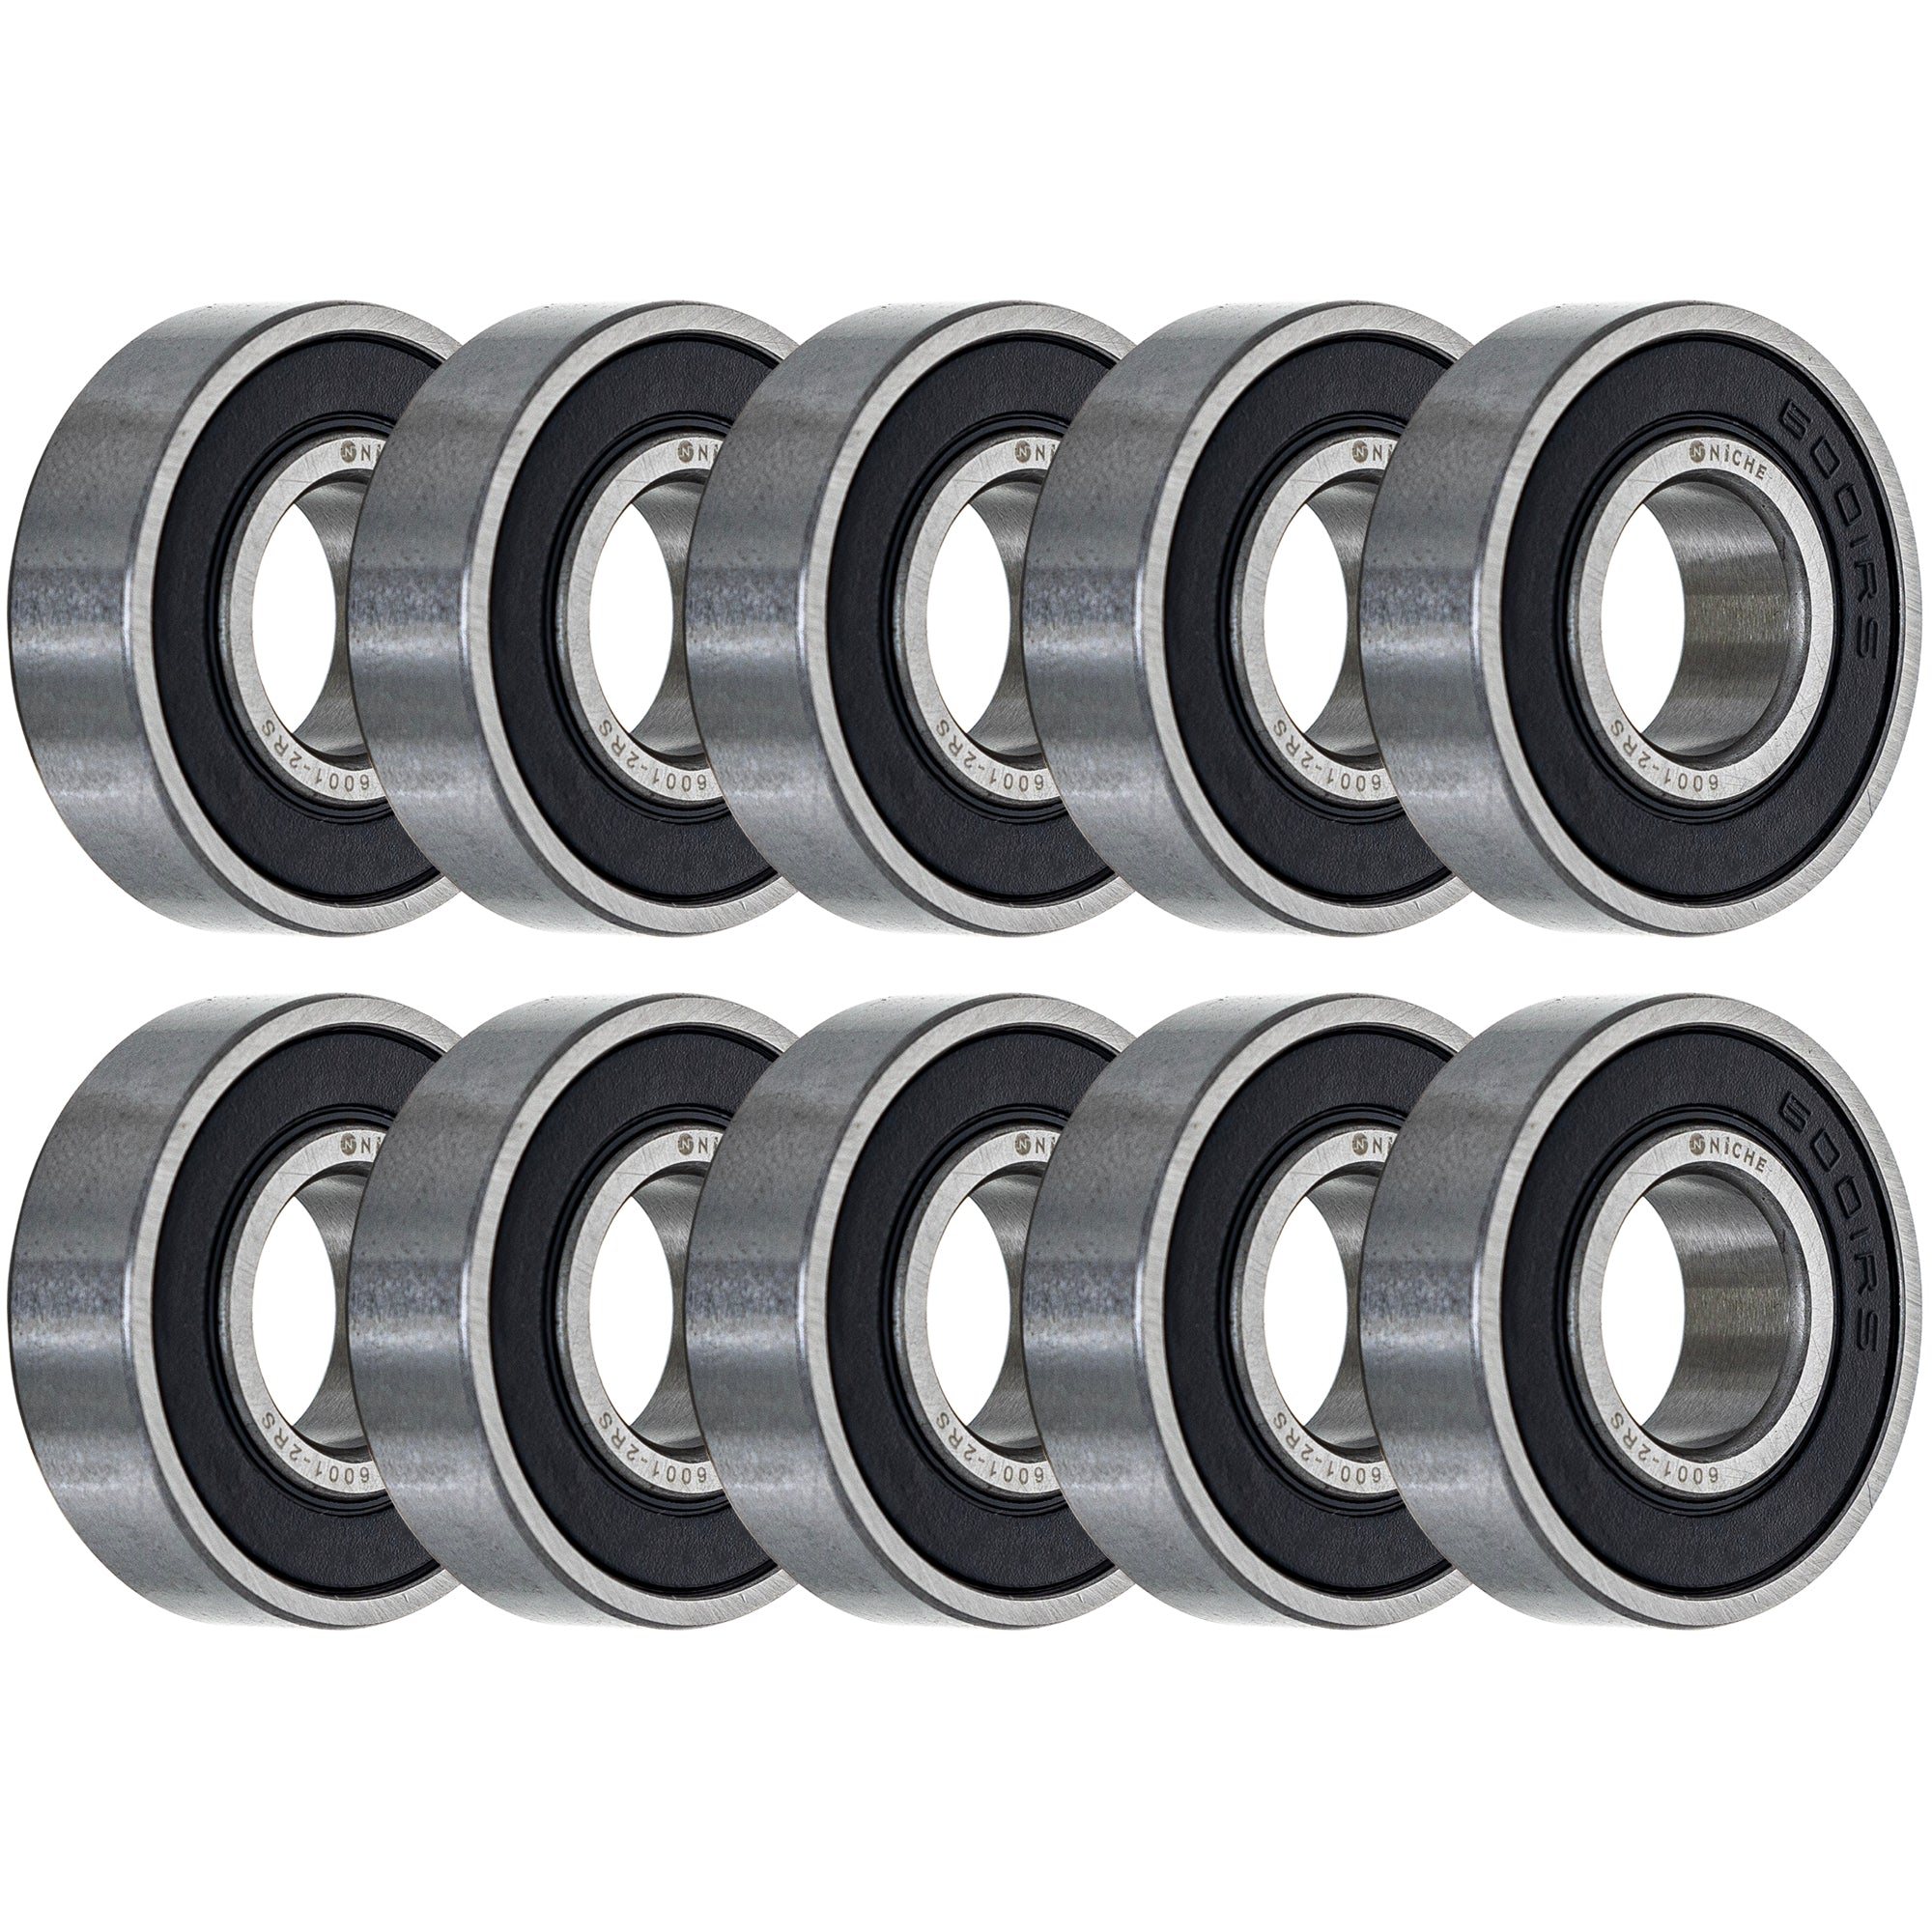 Single Row, Deep Groove, Ball Bearing Pack of 10 10-Pack for zOTHER YZ80 TTR125LE TTR125 NICHE 519-CBB2257R